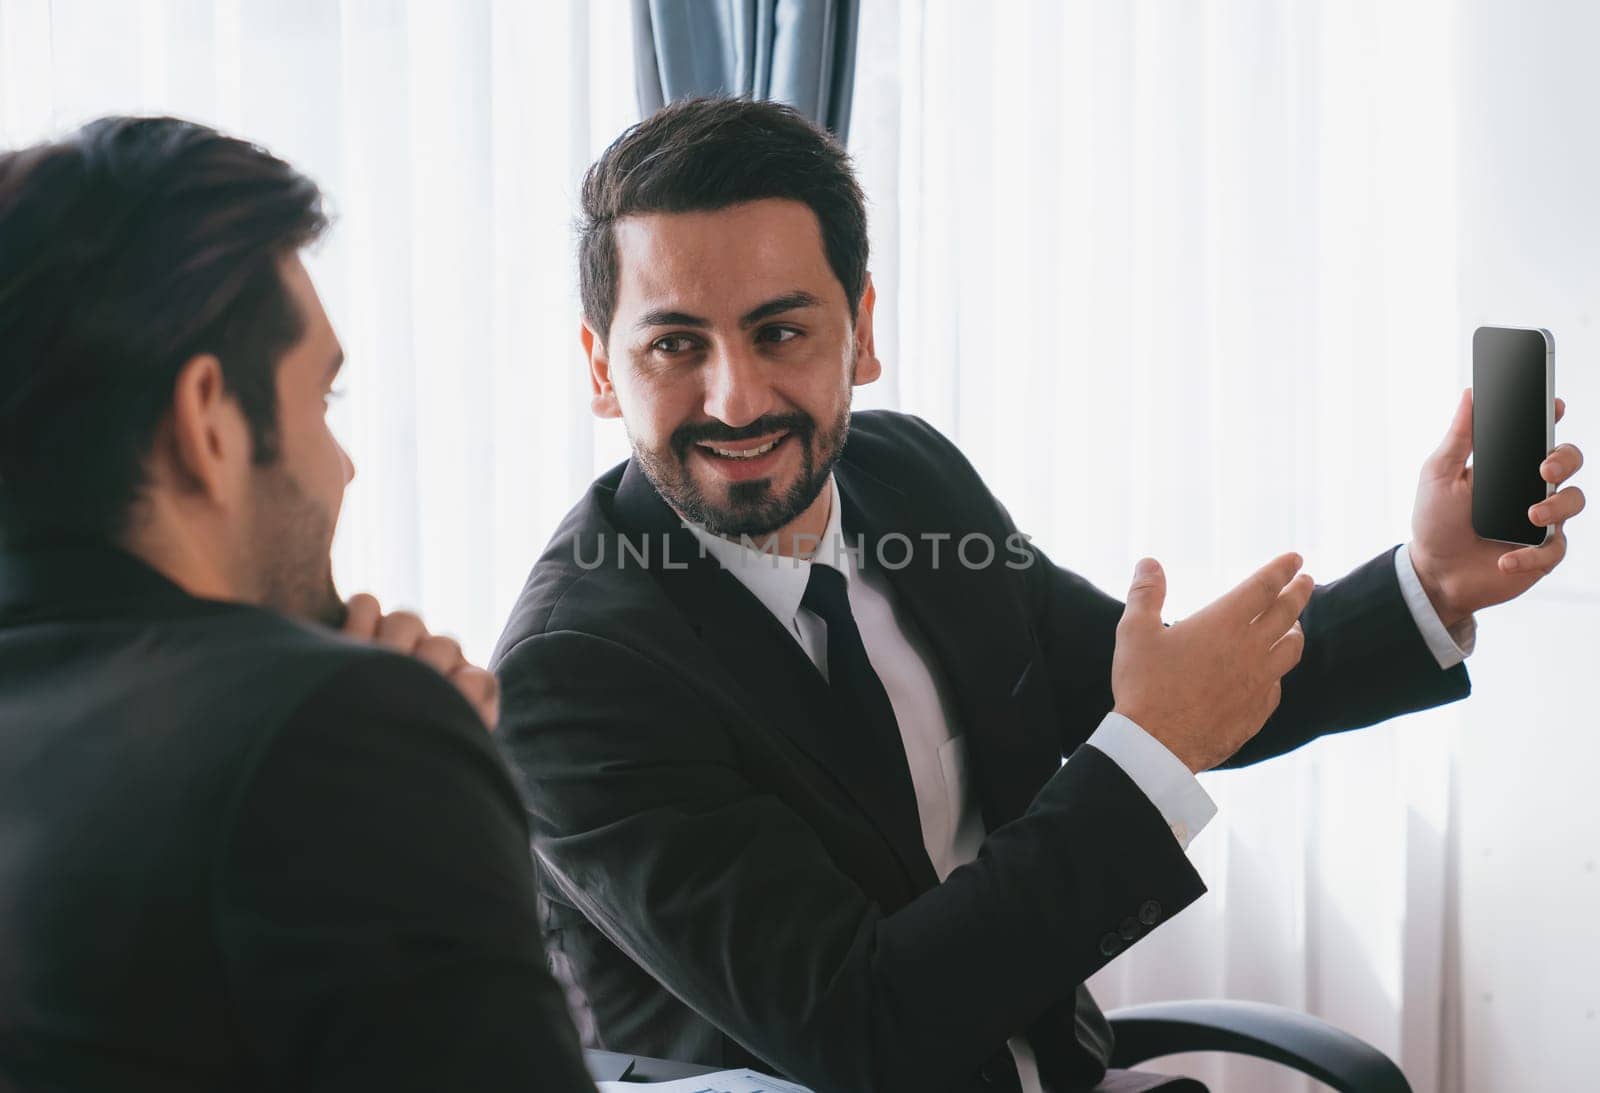 Business people wearing black formal suit in meeting office discussing on business matters and using smartphone. Professional businessman with happy look talking to coworker or client on desk. Fervent